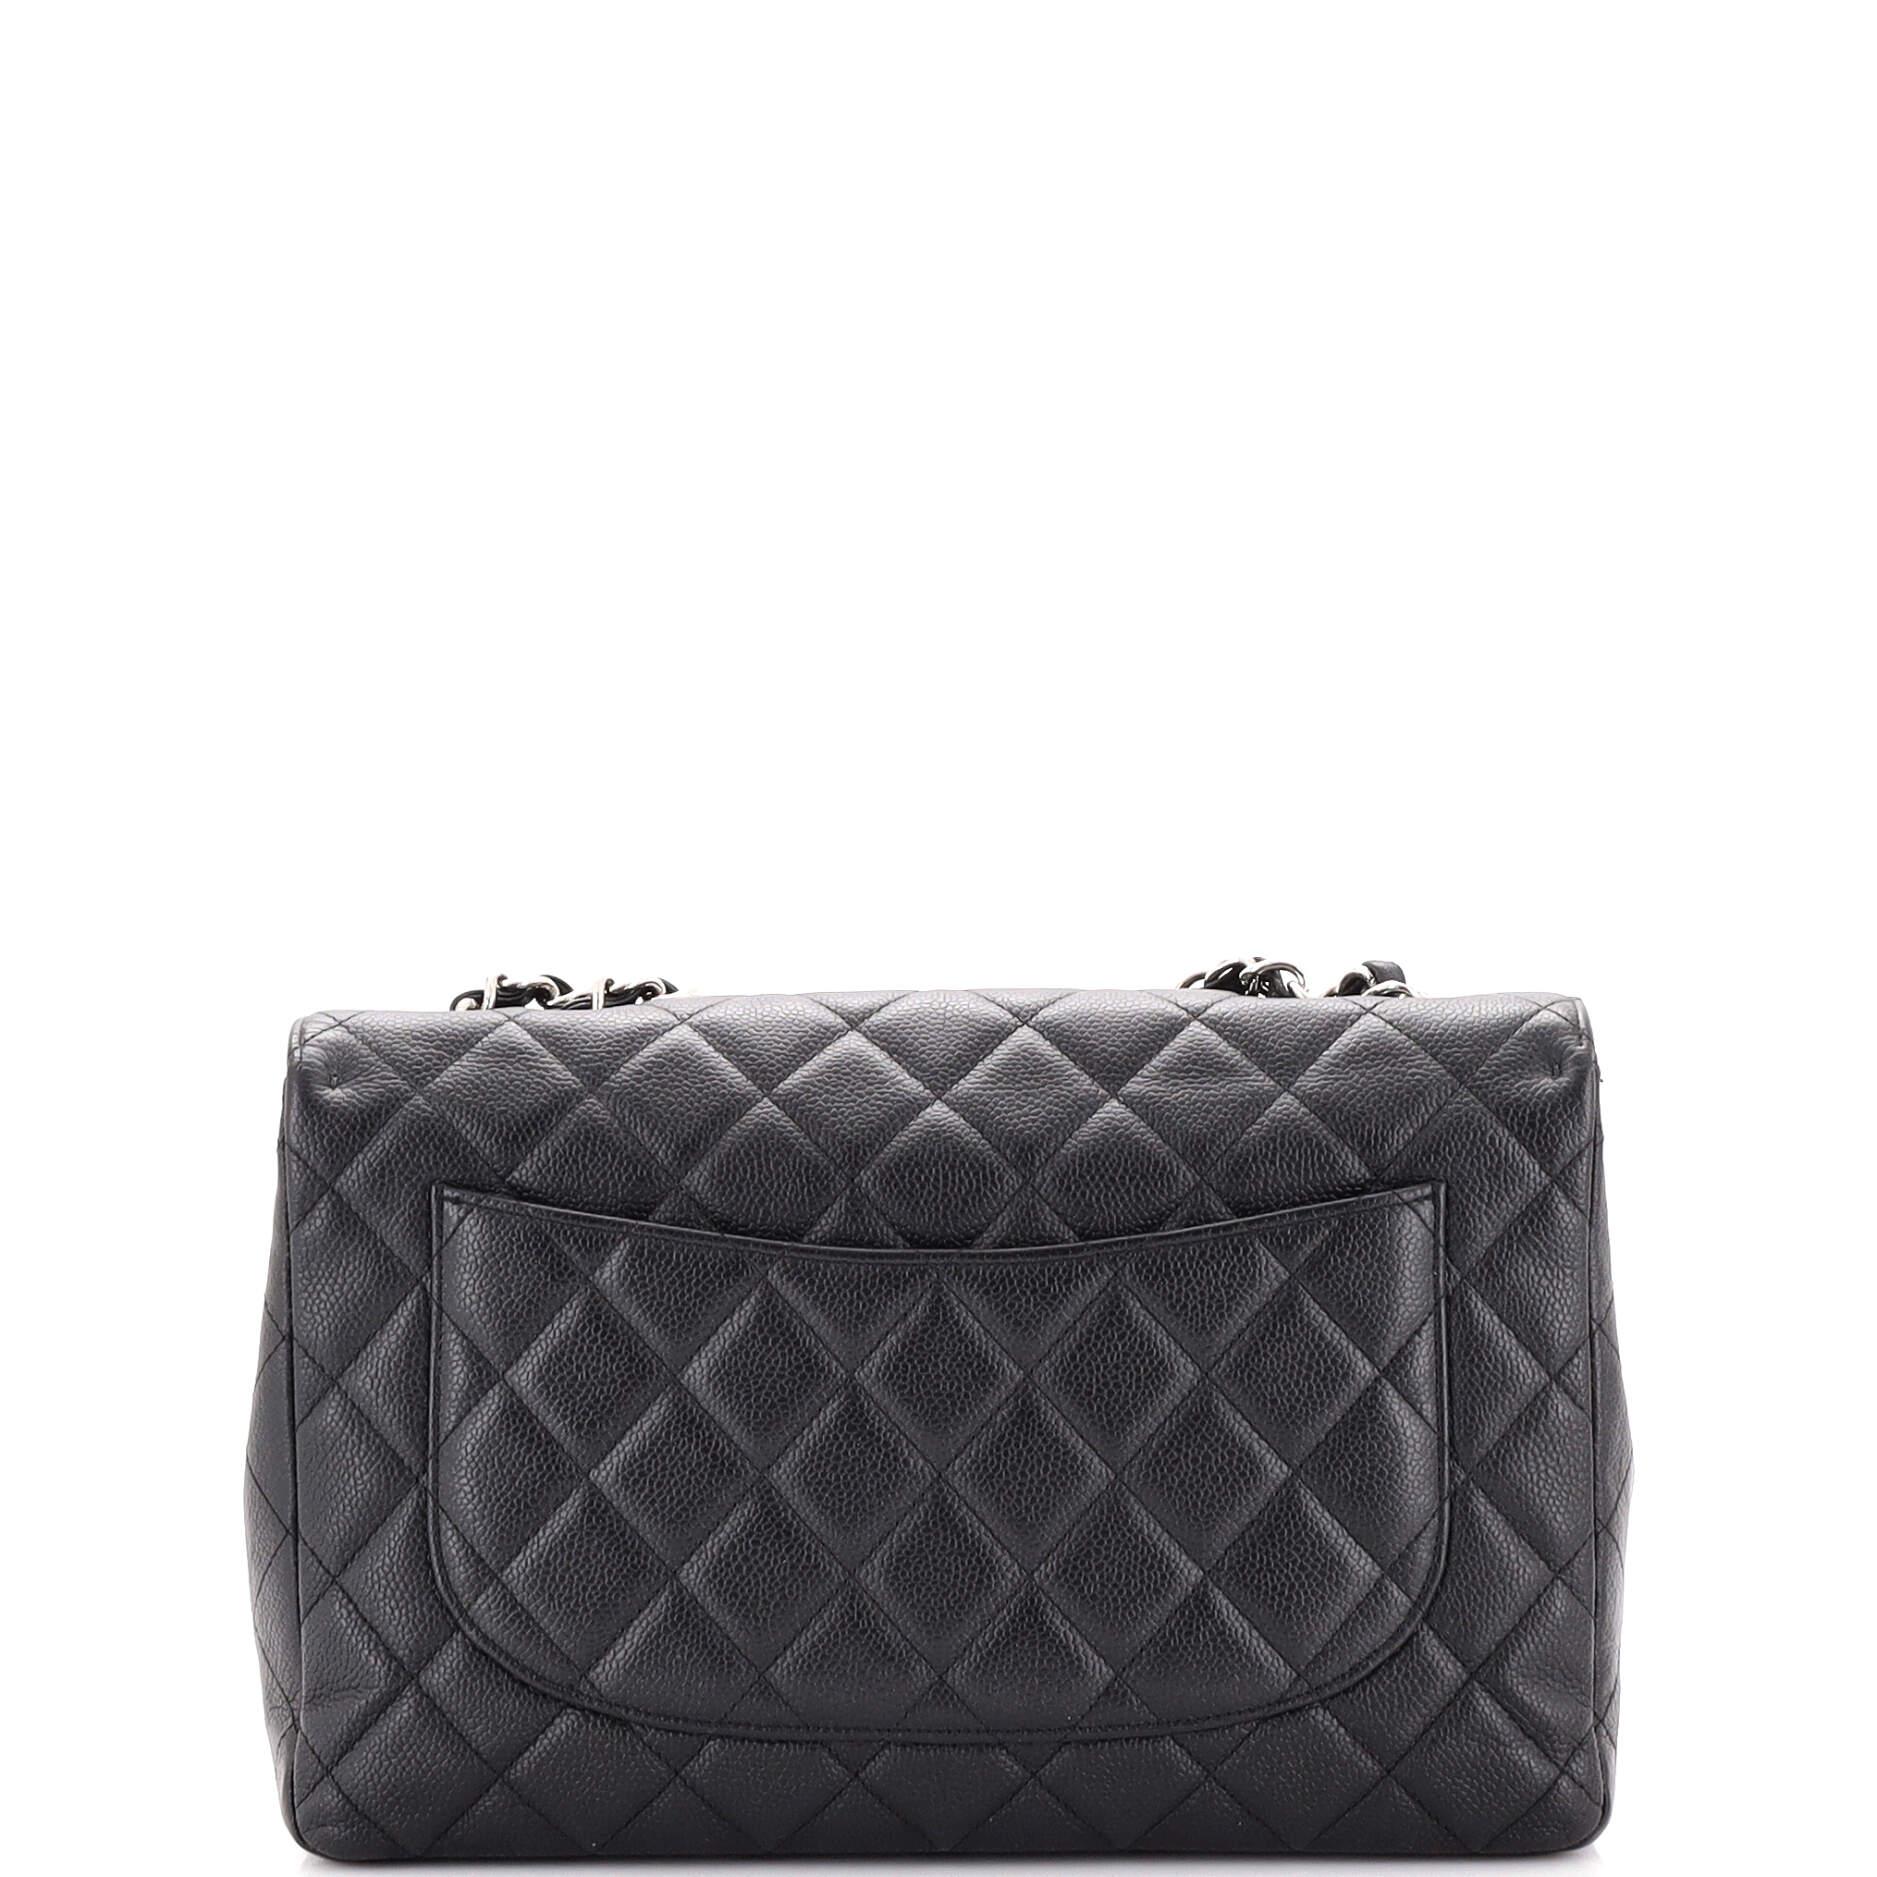 Women's or Men's Chanel Vintage Classic Single Flap Bag Quilted Caviar Jumbo